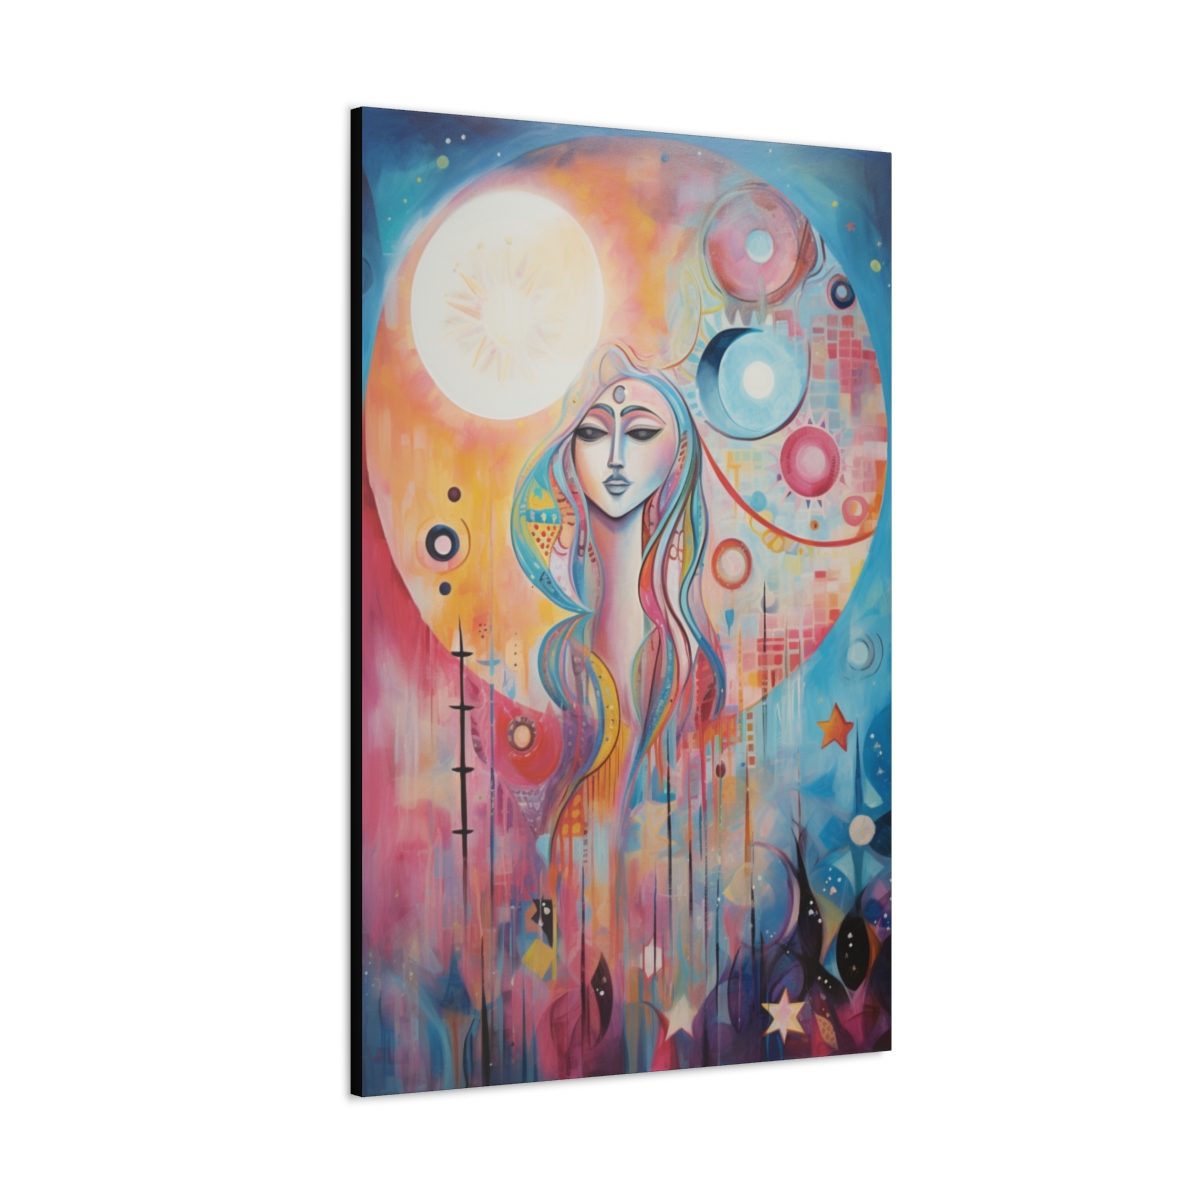 Dreamy Nature Ethereal Art Canvas Print: Astral Kaleidoscope